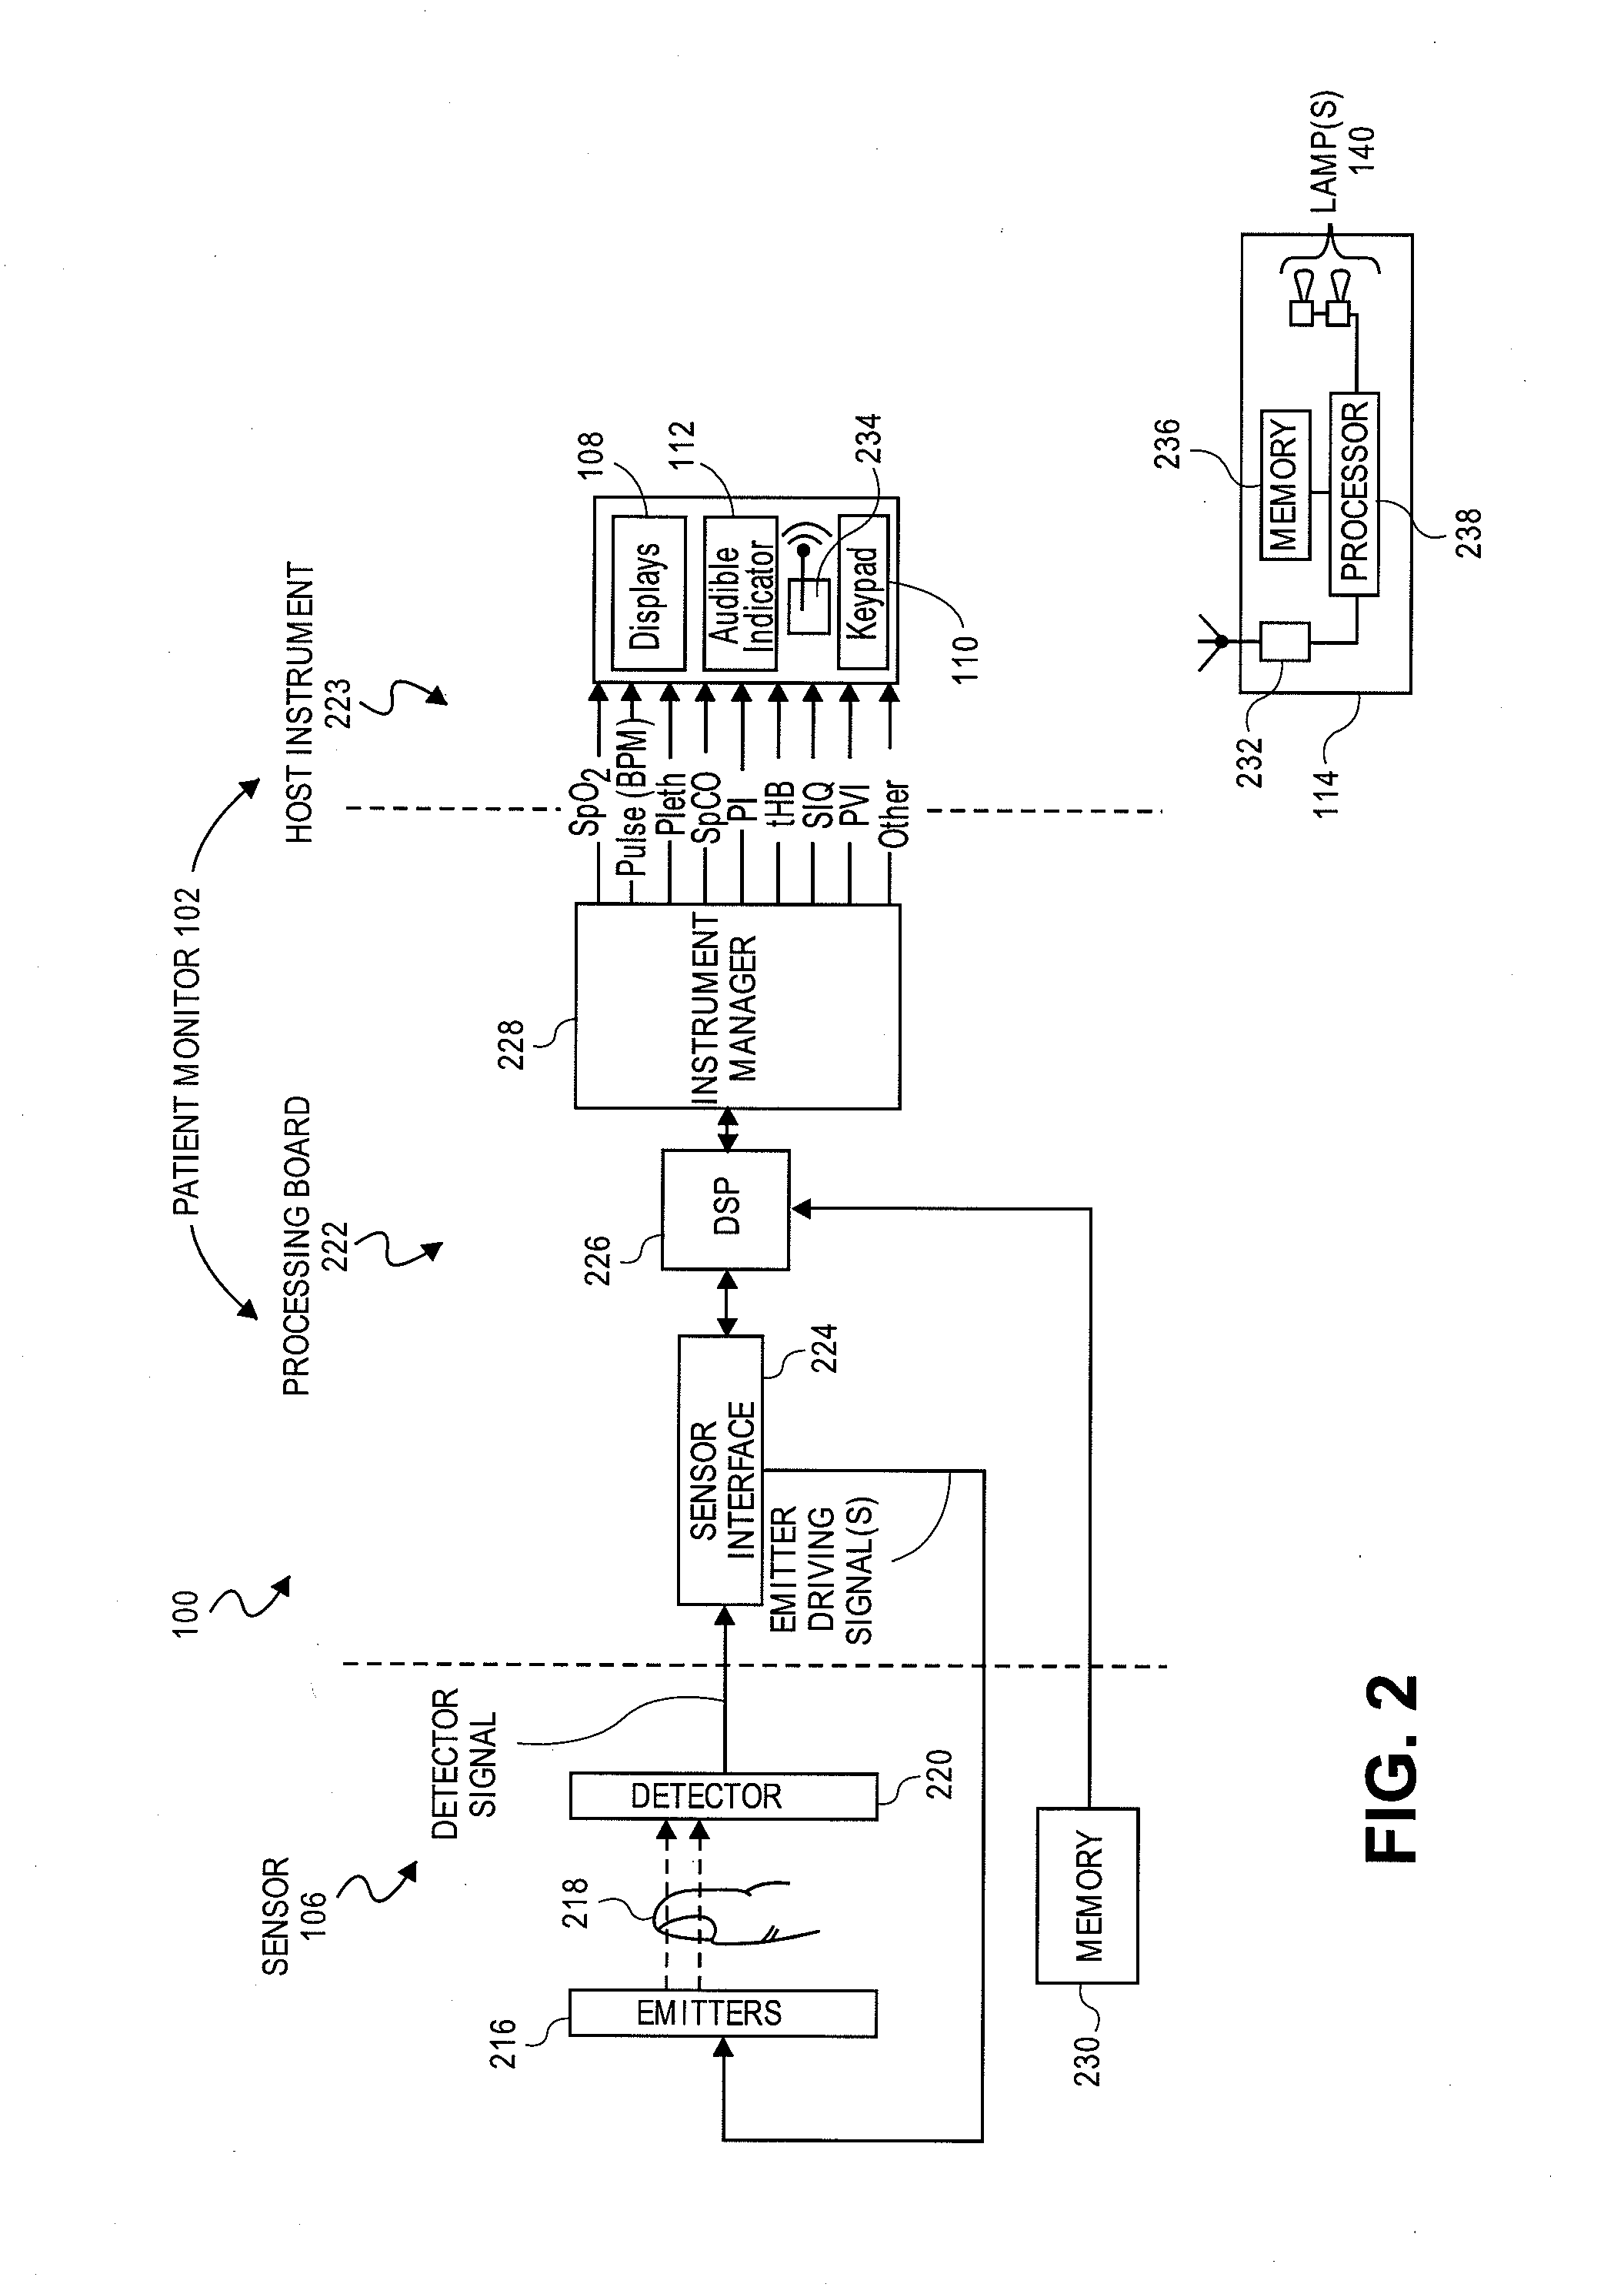 Patient monitor ambient display device